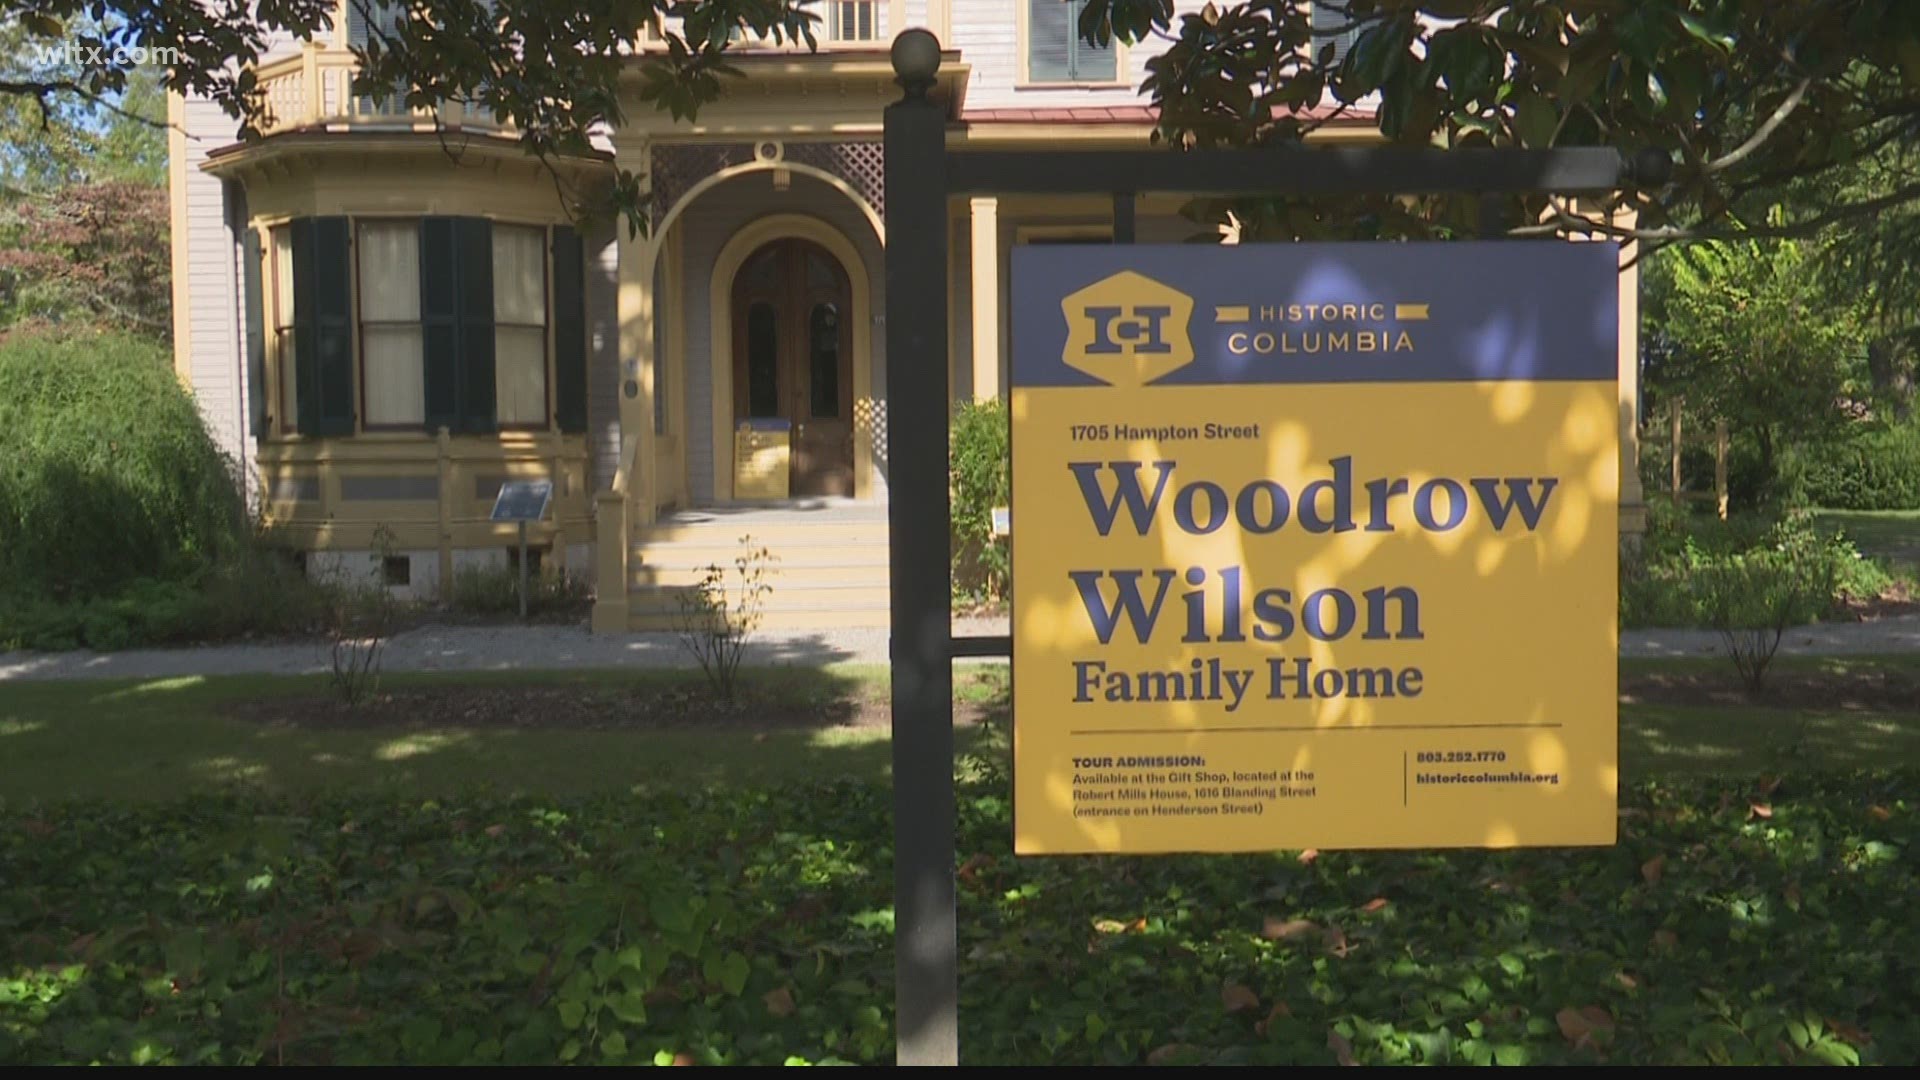 It will now be known as "The Museum of the Reconstruction Era" at the Woodrow Wilson family home.